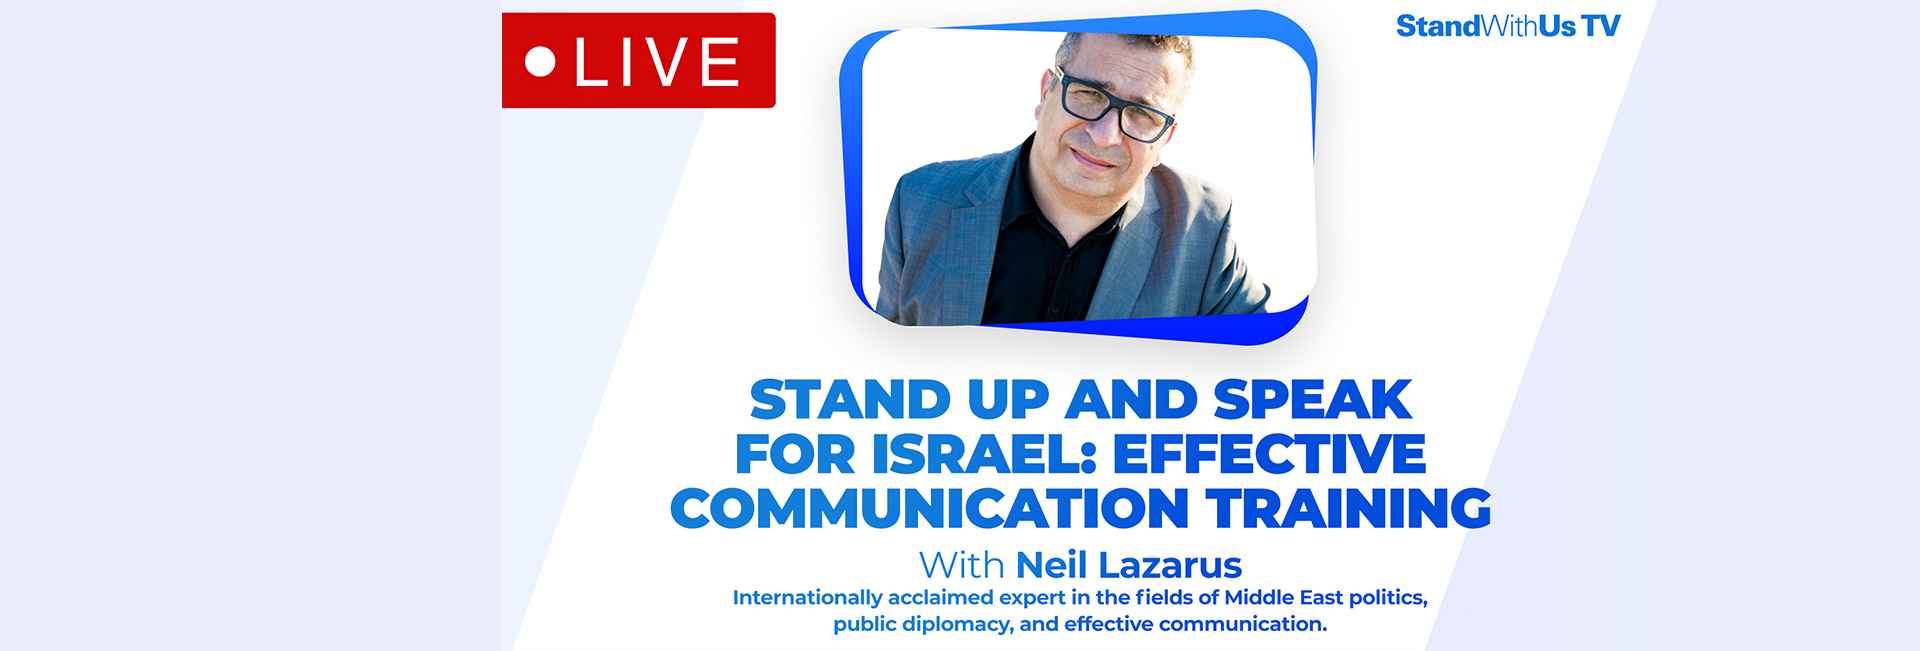 Stand up and Speak for Israel: Effective Communication Training | SWUConnect #2